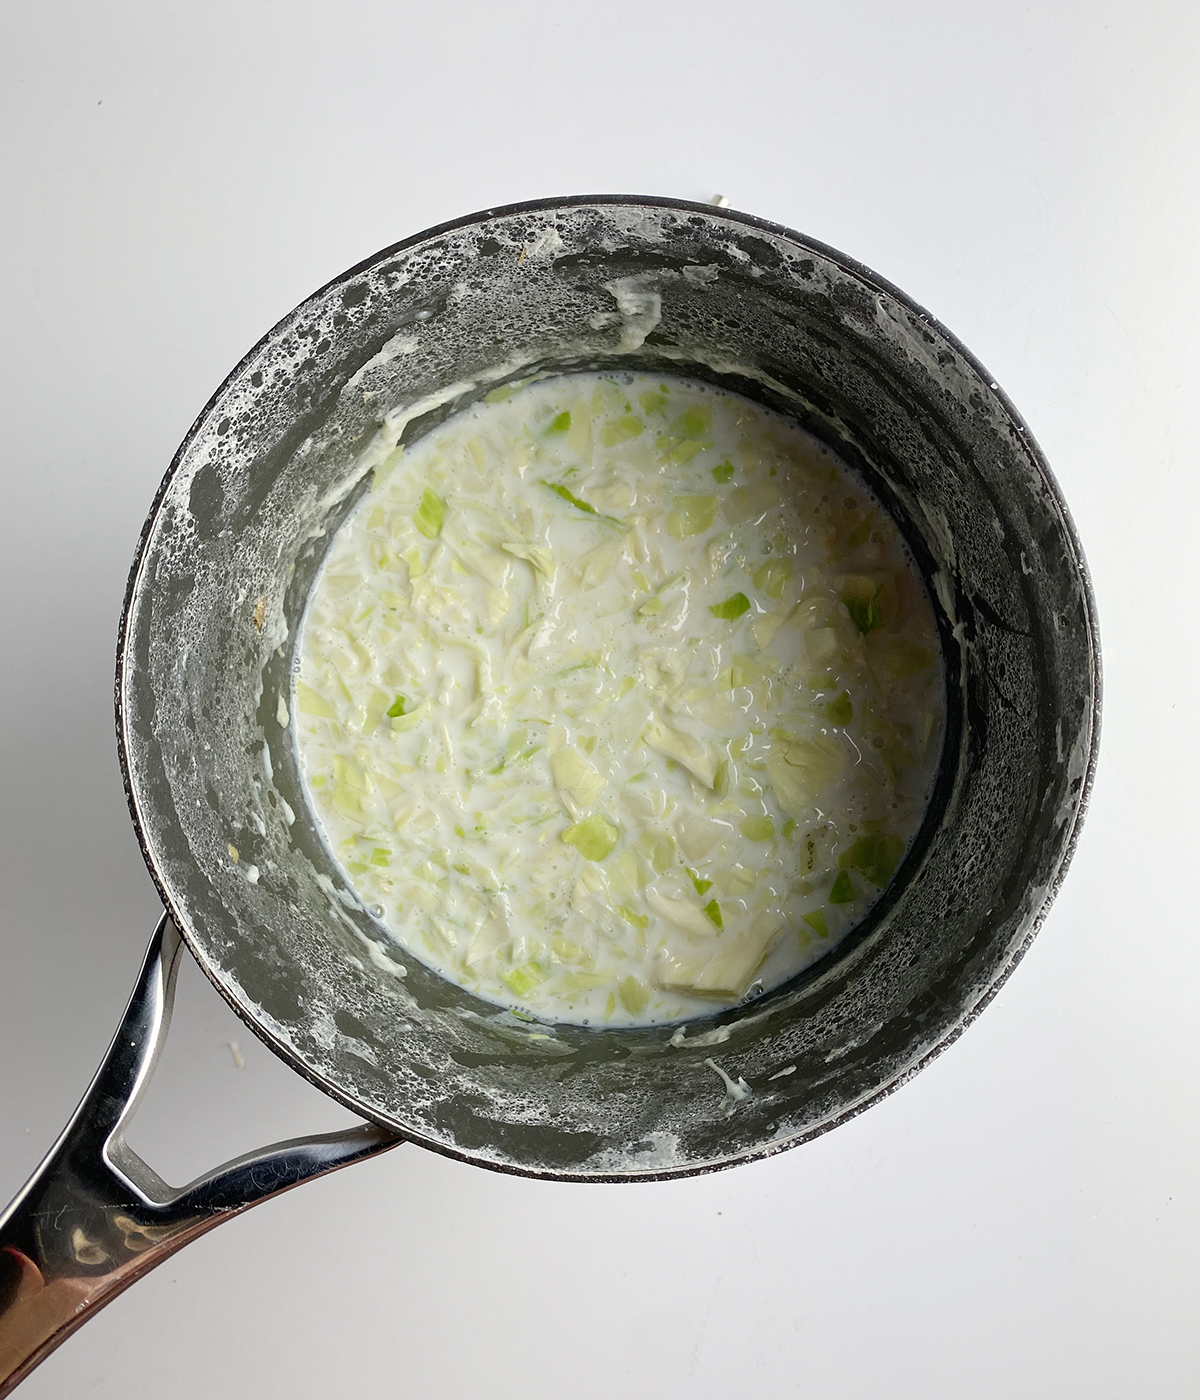 Chopped cabbage cooked in milk in a pot.